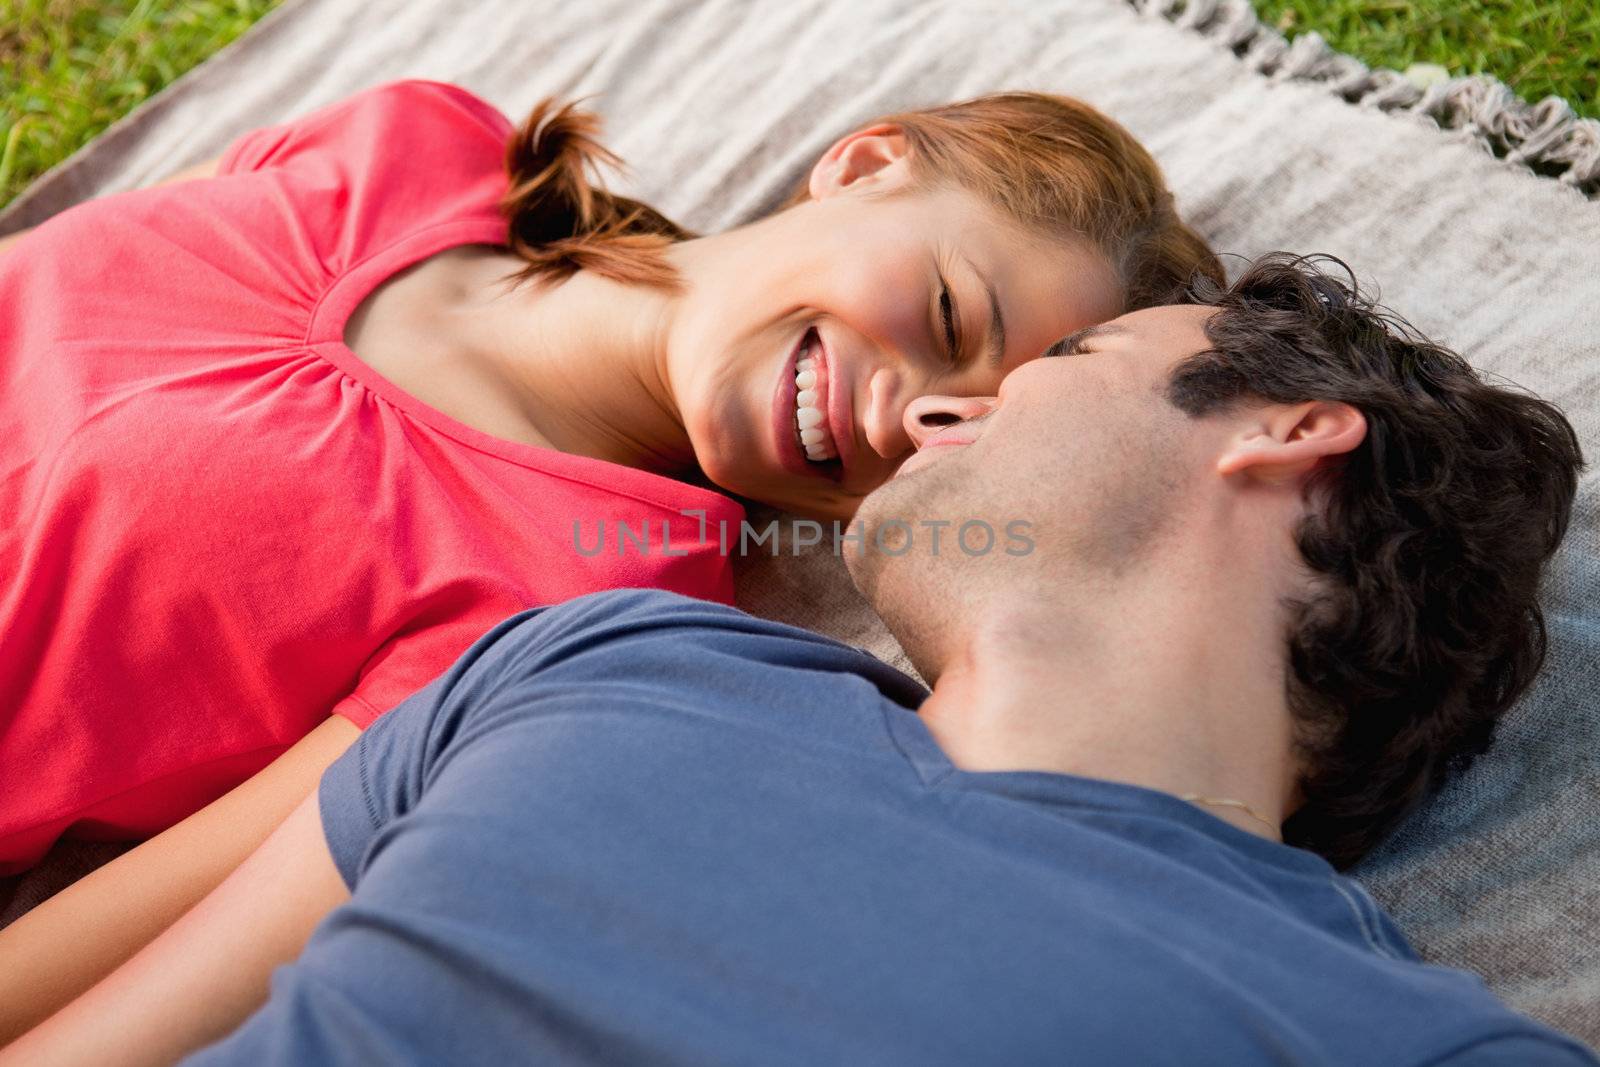 Woman smiling while lying next to her friend on a quilt by Wavebreakmedia